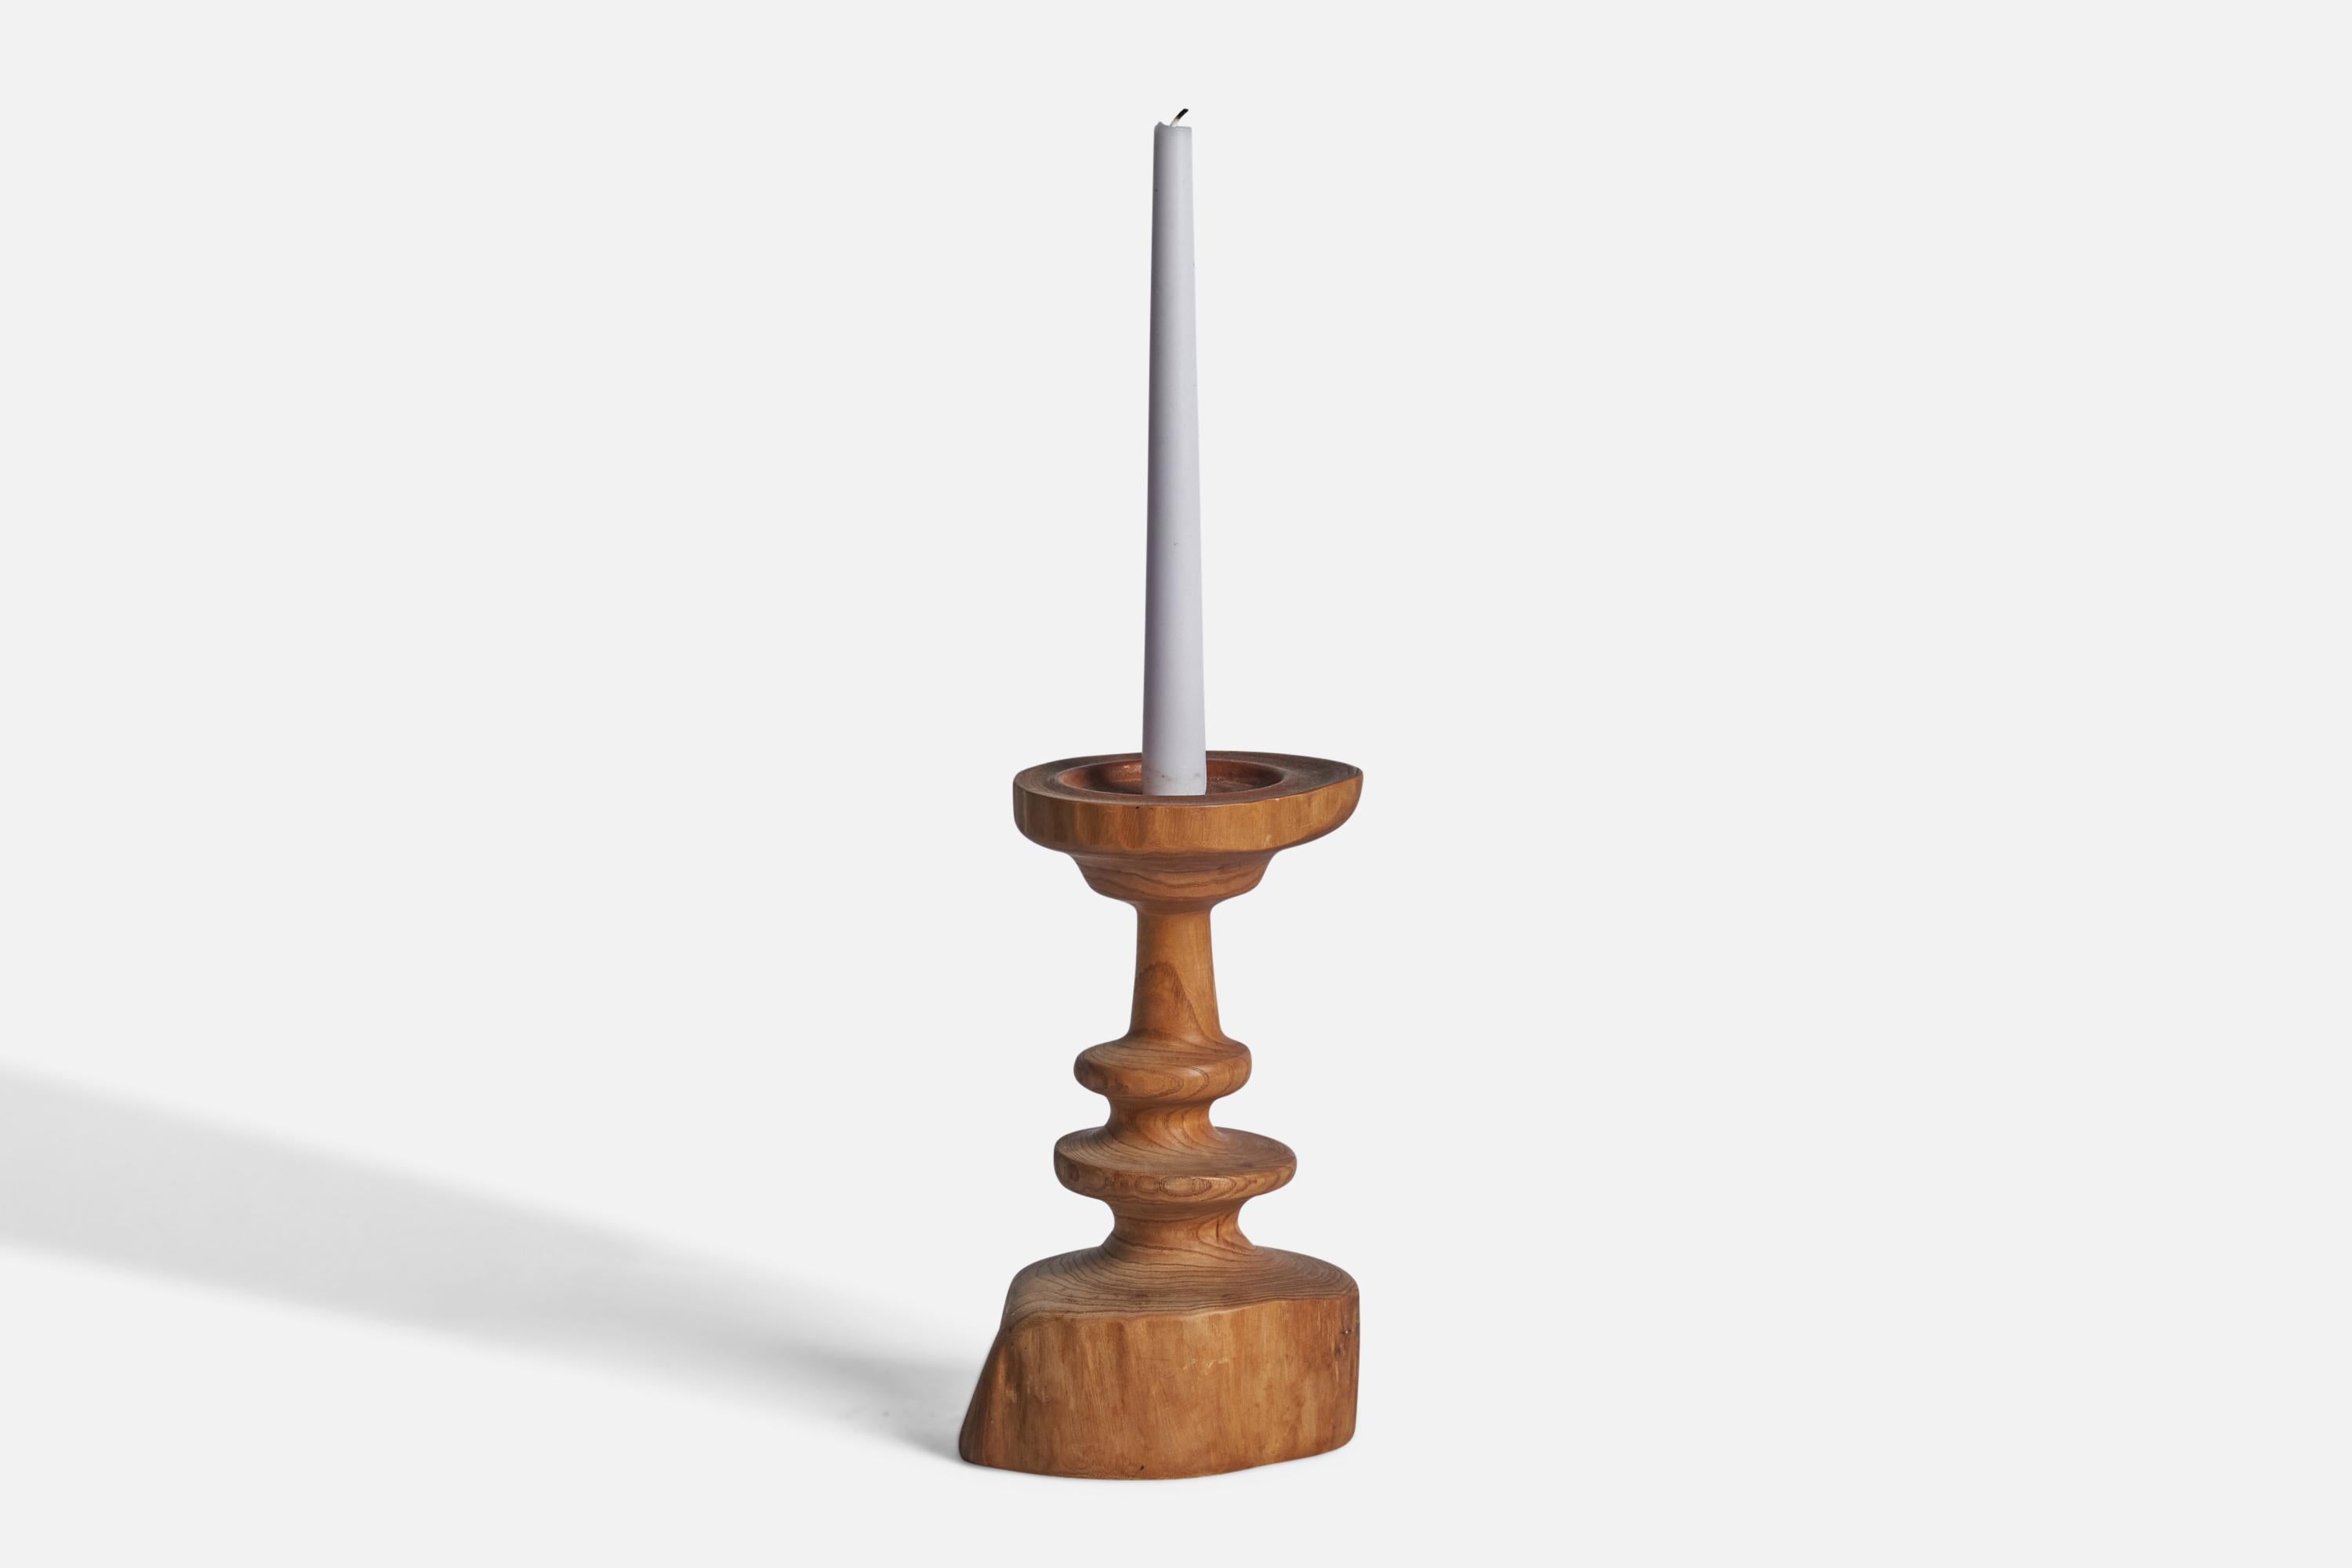 A freeform pine candlestick designed and produced in Sweden, c. 1970s.

Holds 0.75” candle